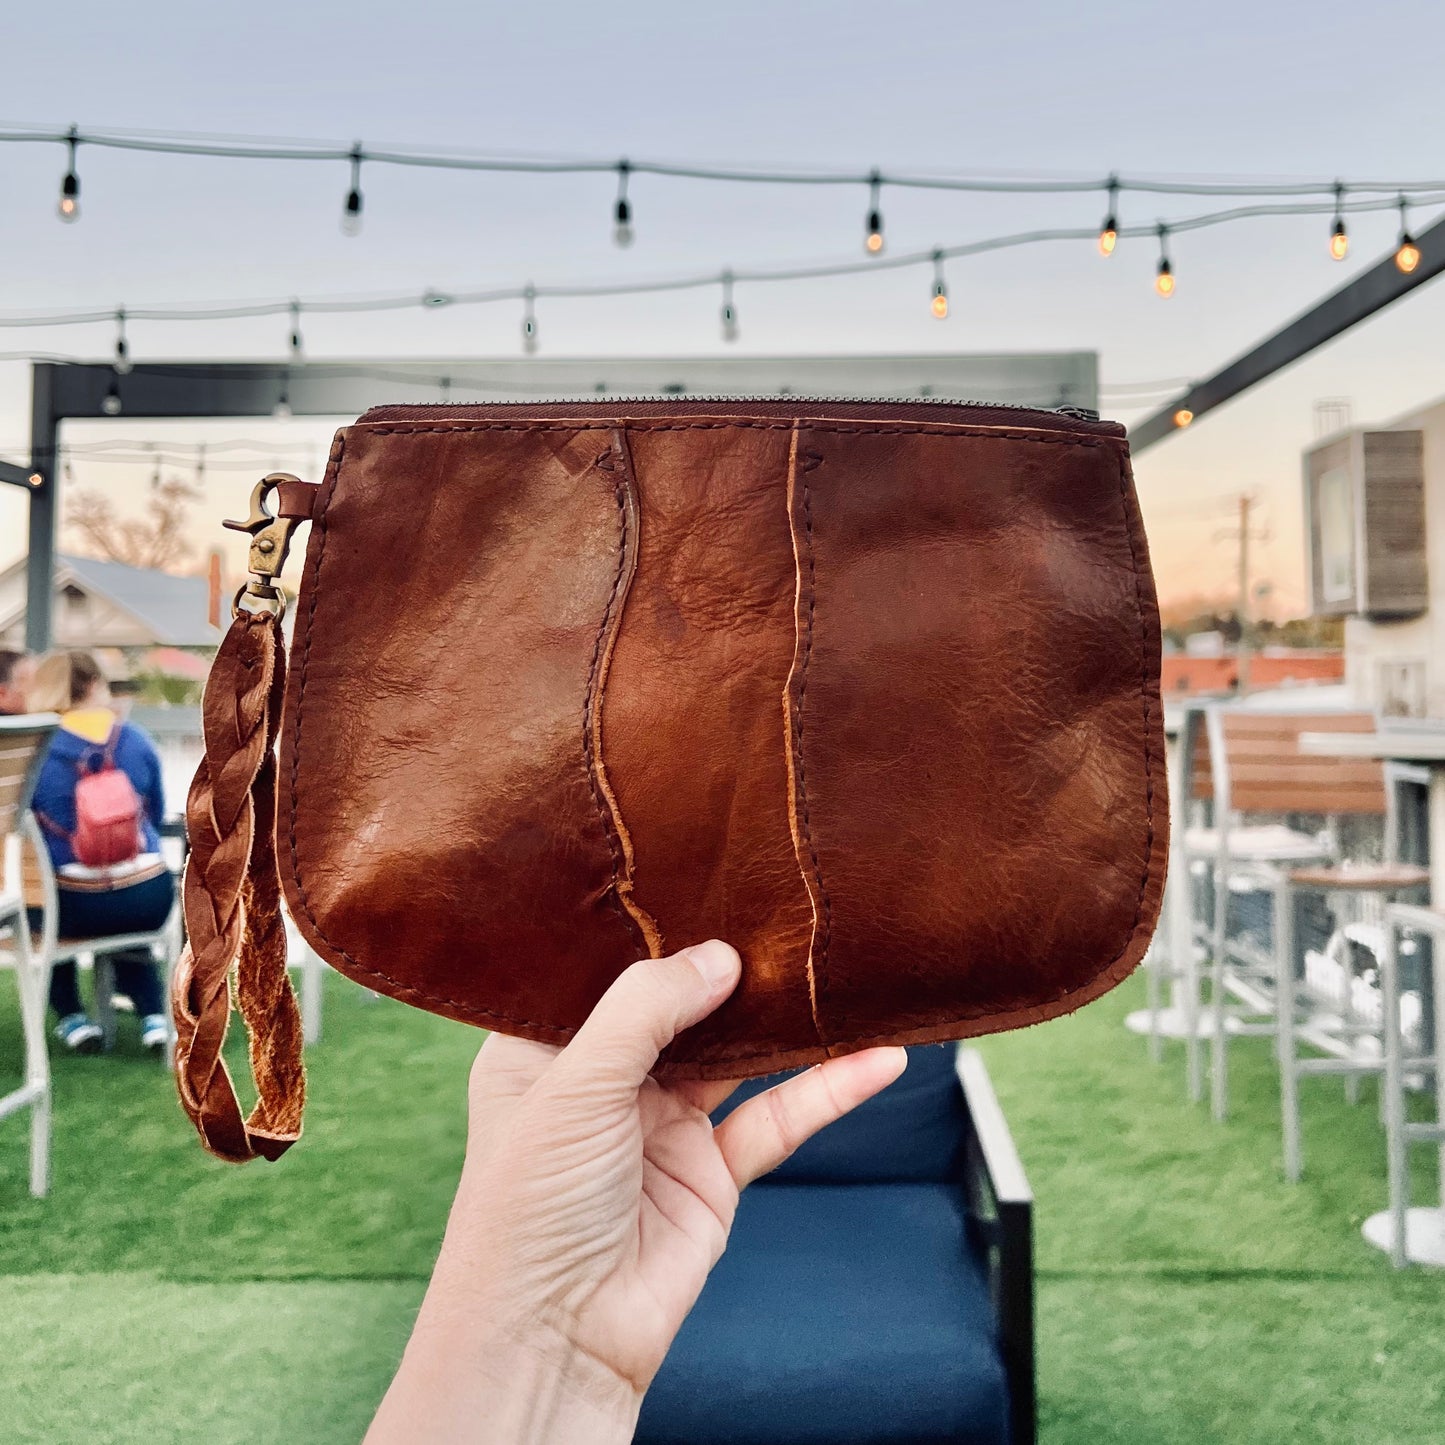 1974 Broad River Leather Wristlet hanging out in Starland Yard, Savannah